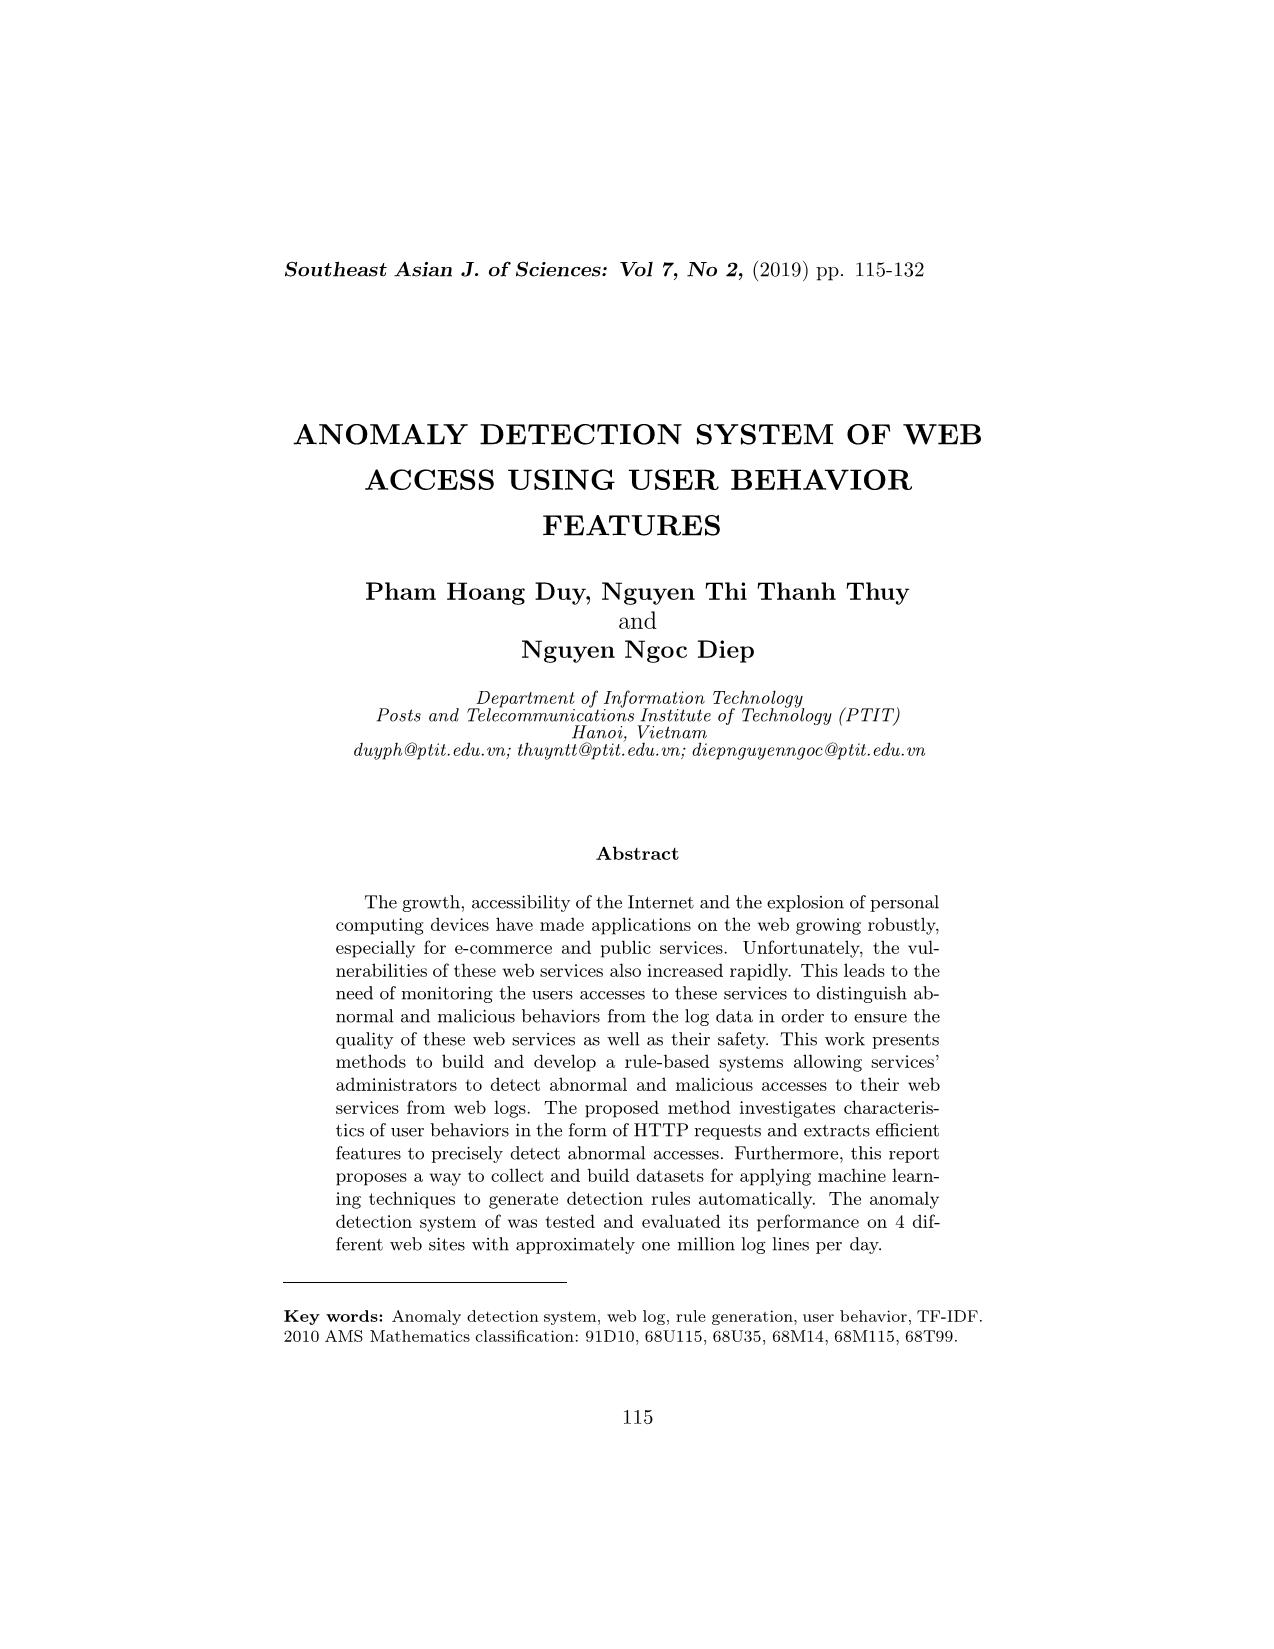 Anomaly detection system of web access using user behavior features trang 1